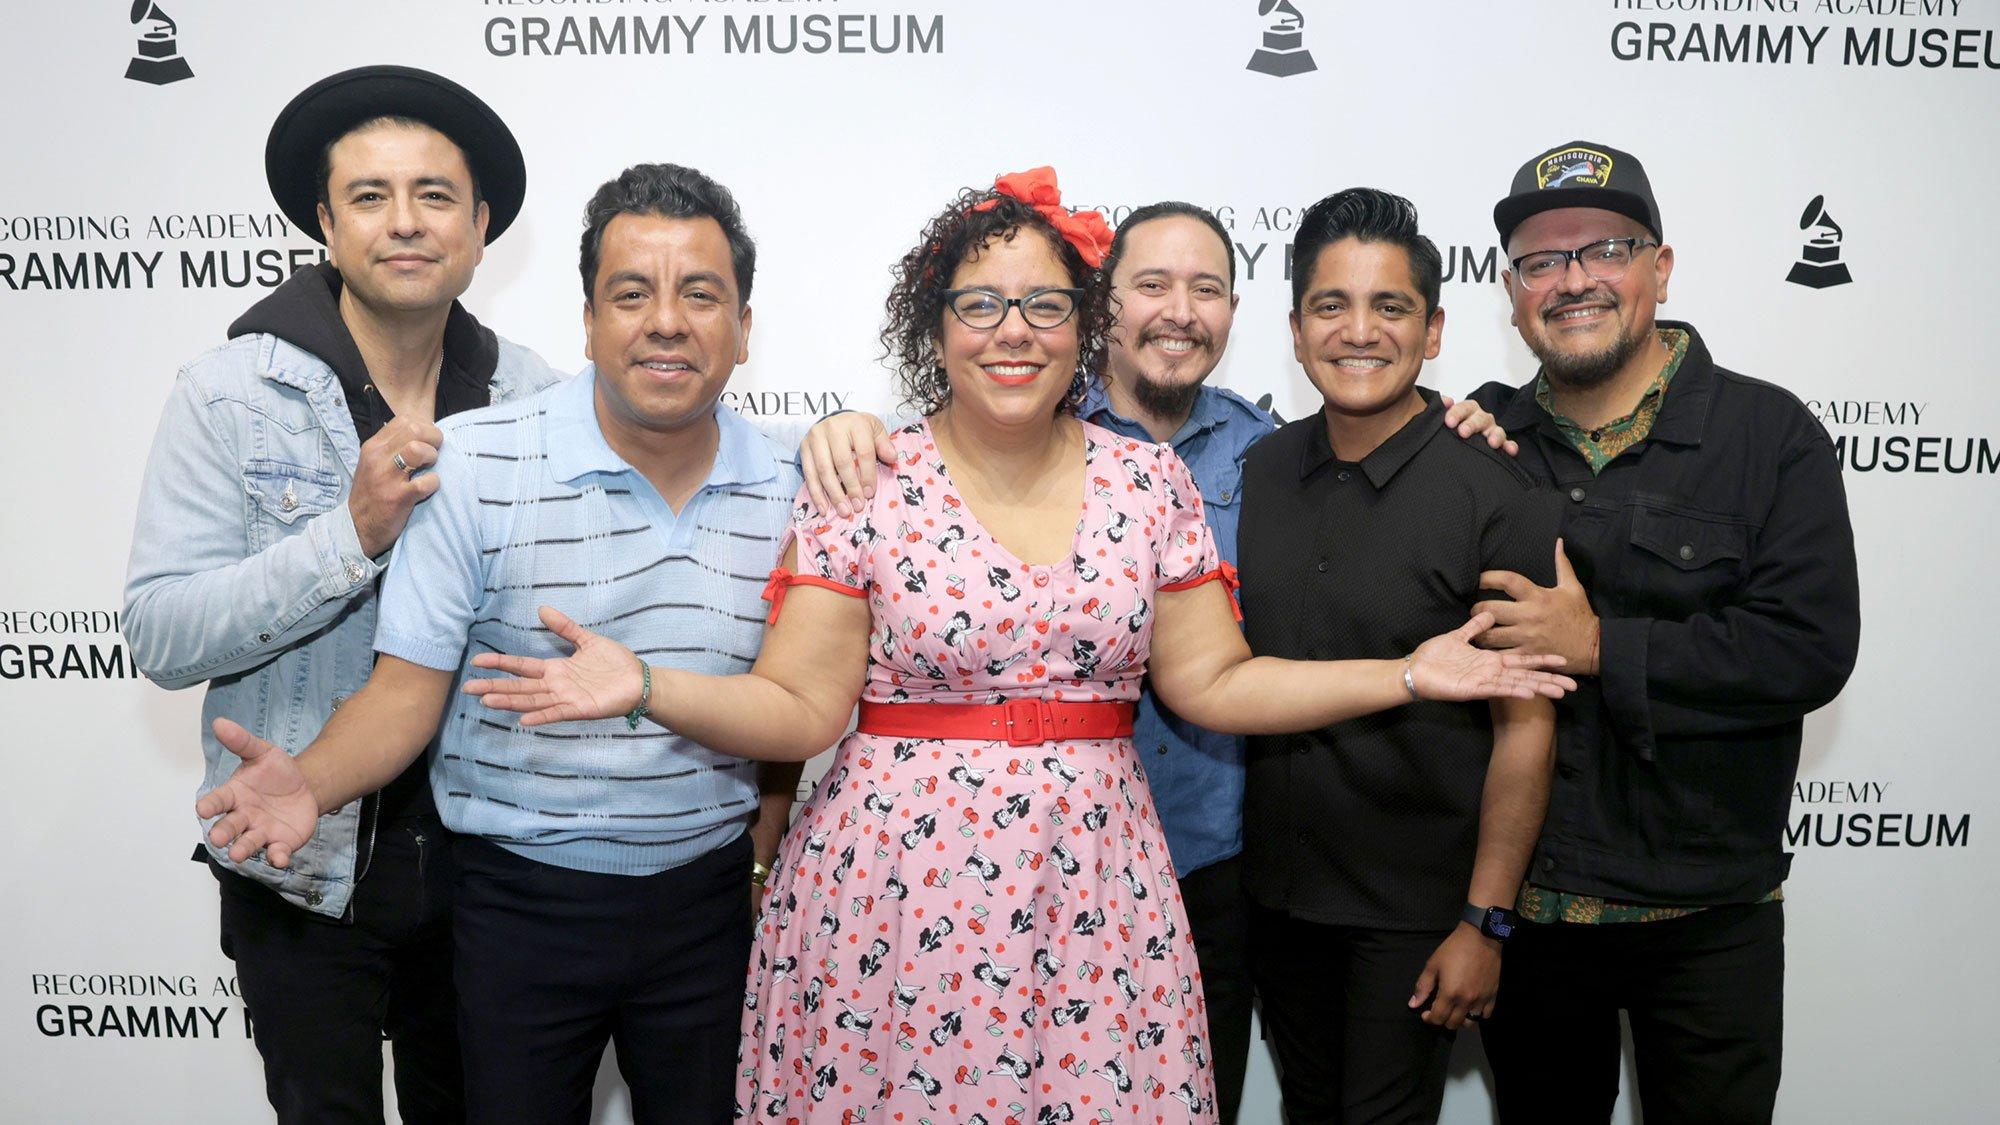 La Santa Cecilia poses for a photo together in front of a step and repeat at the GRAMMY Museum